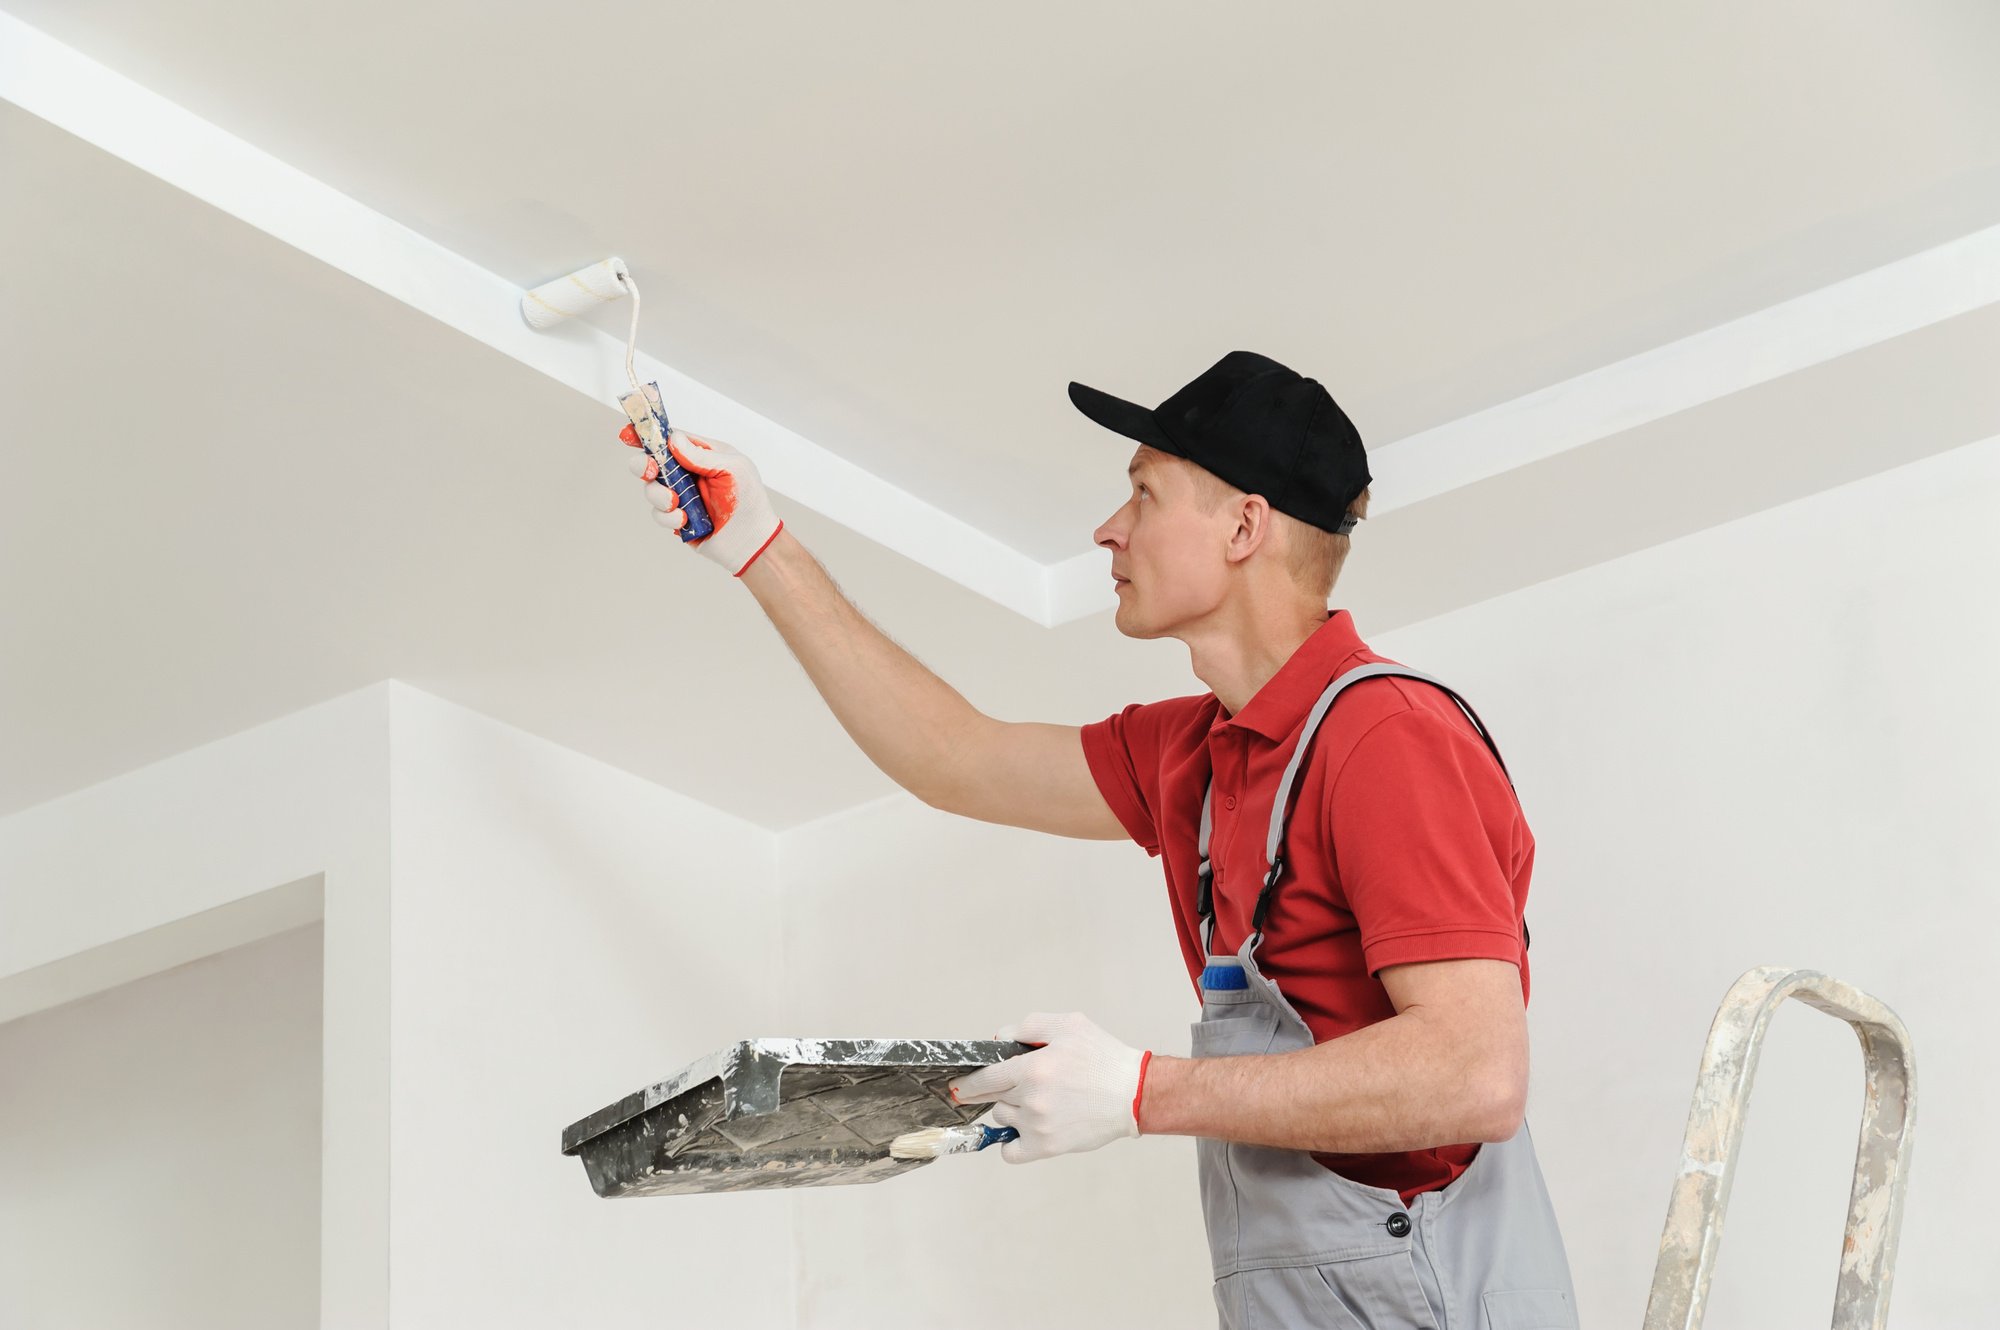 Wondering if it's too much of the same color for one space? Explore the pros and cons of painting the ceiling the same color as the walls.